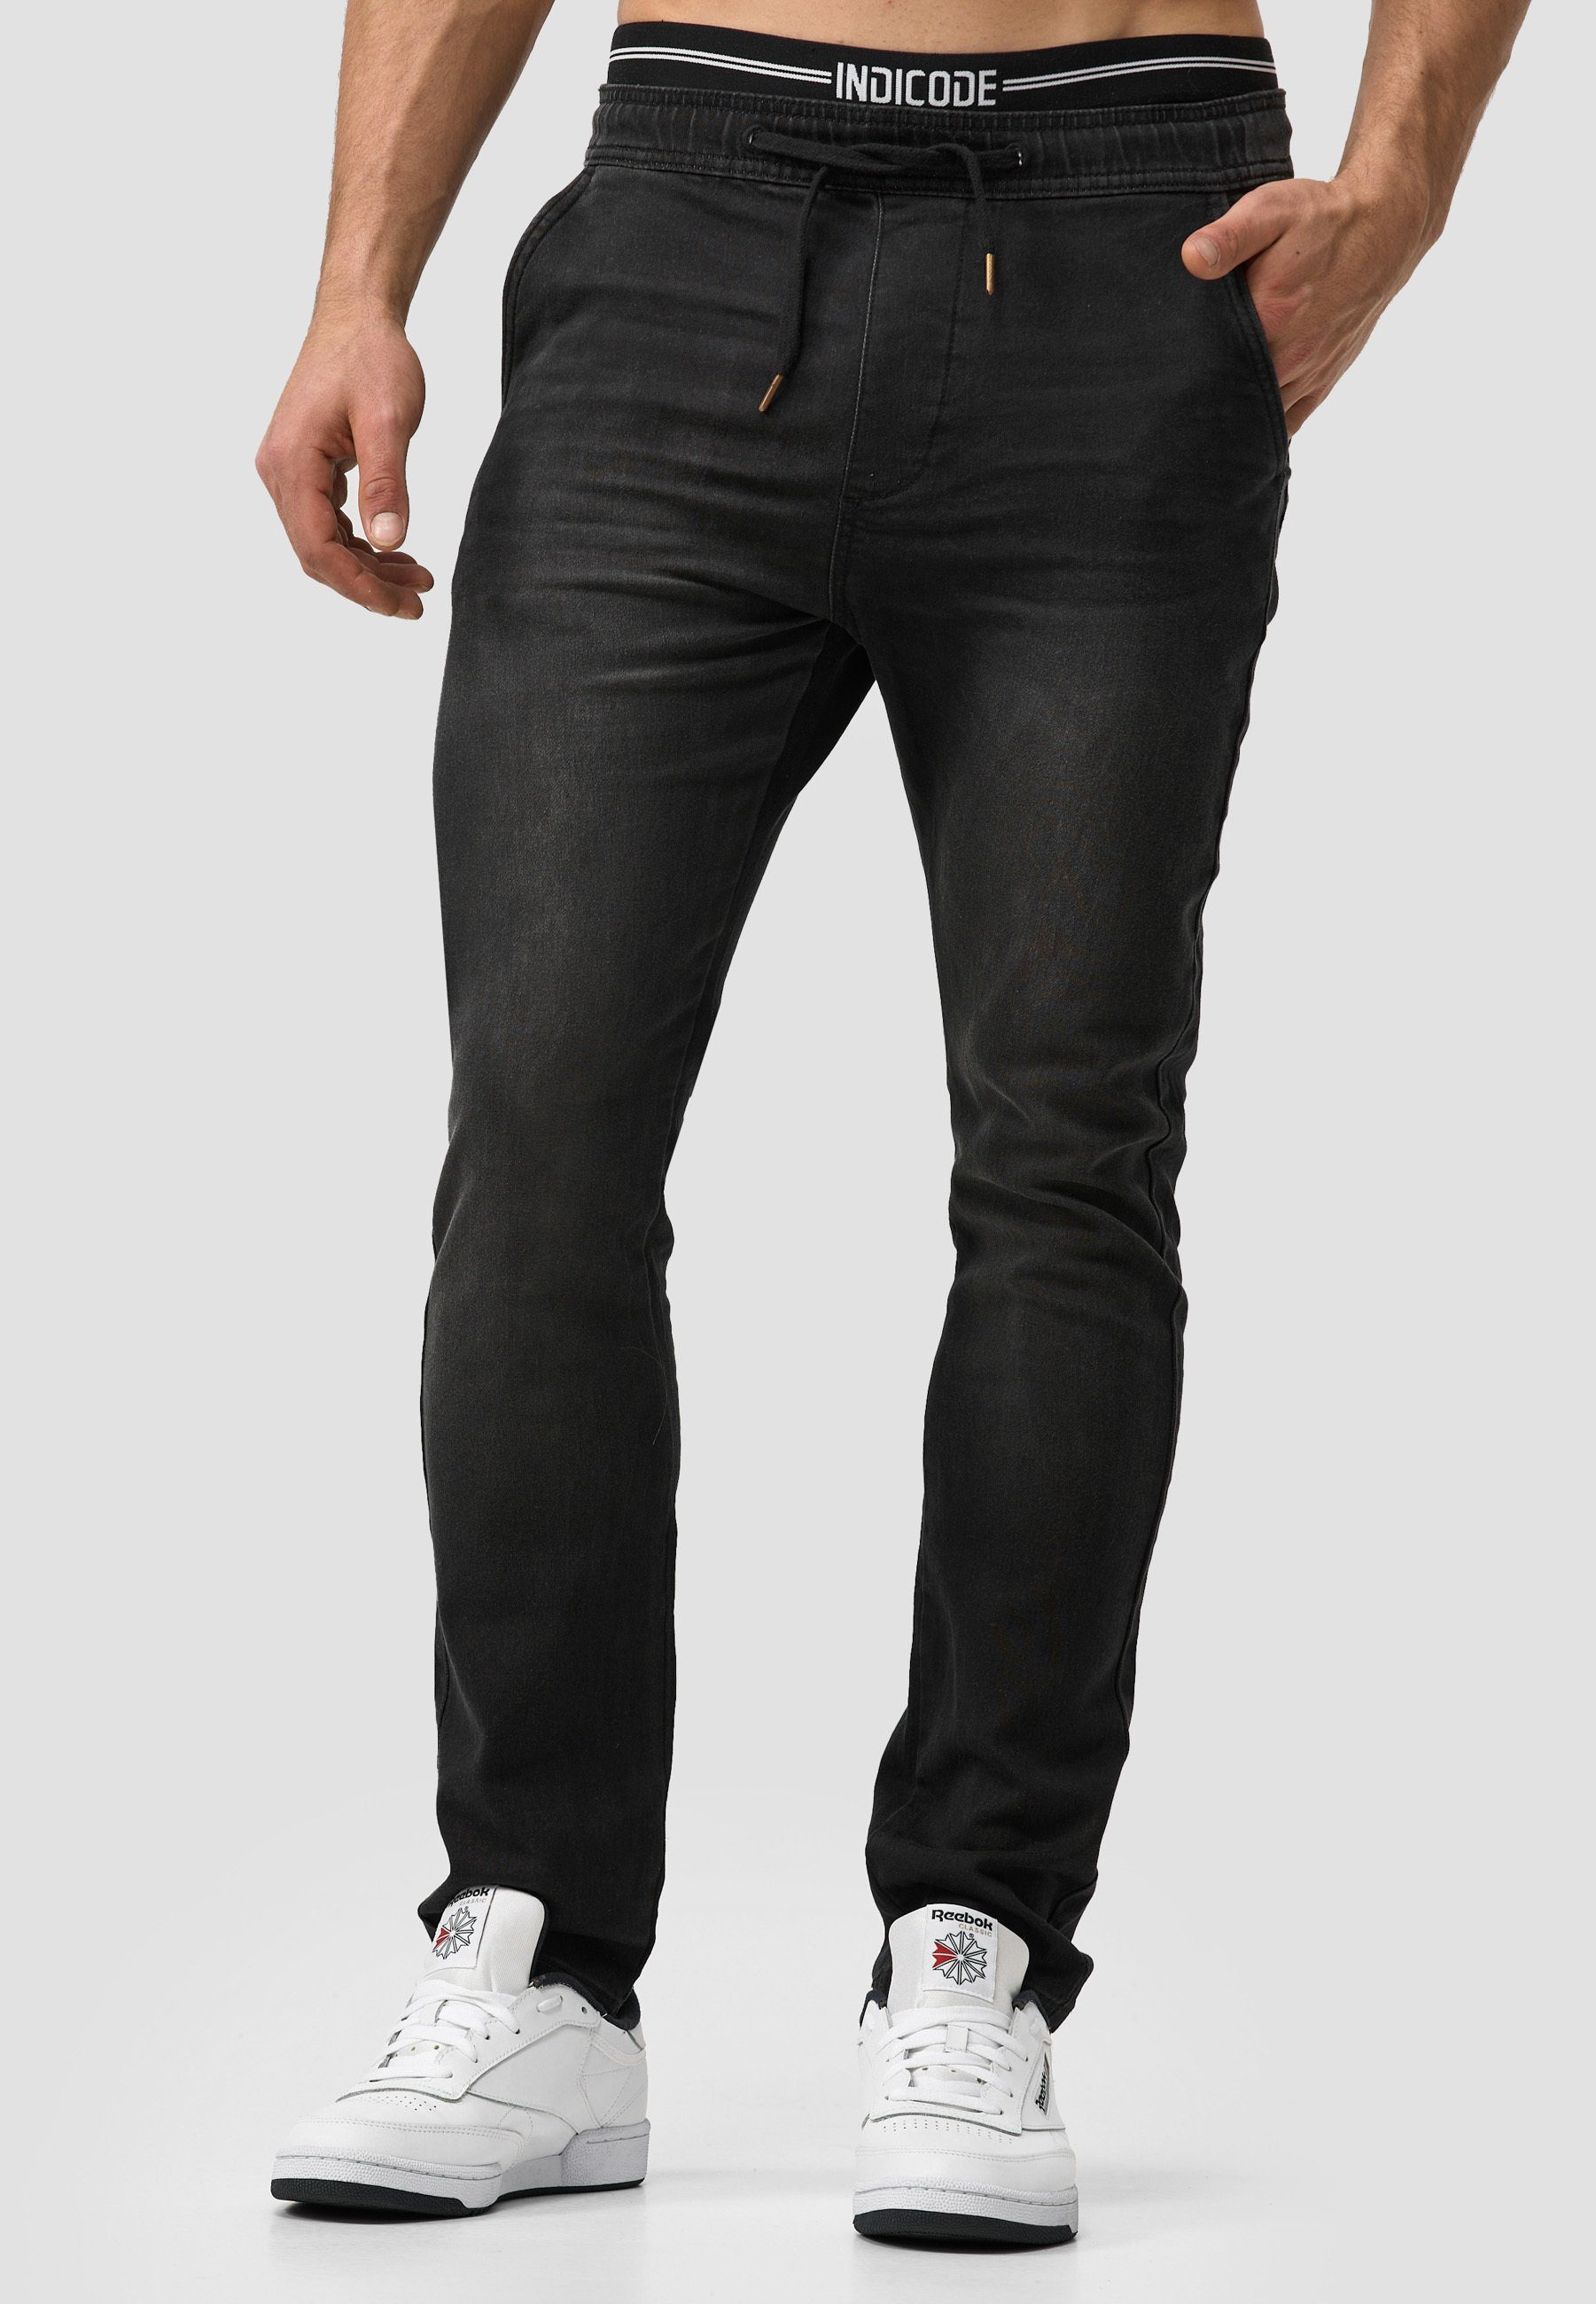 Indicode Bequeme Jeans Alban Black | Straight-Fit Jeans